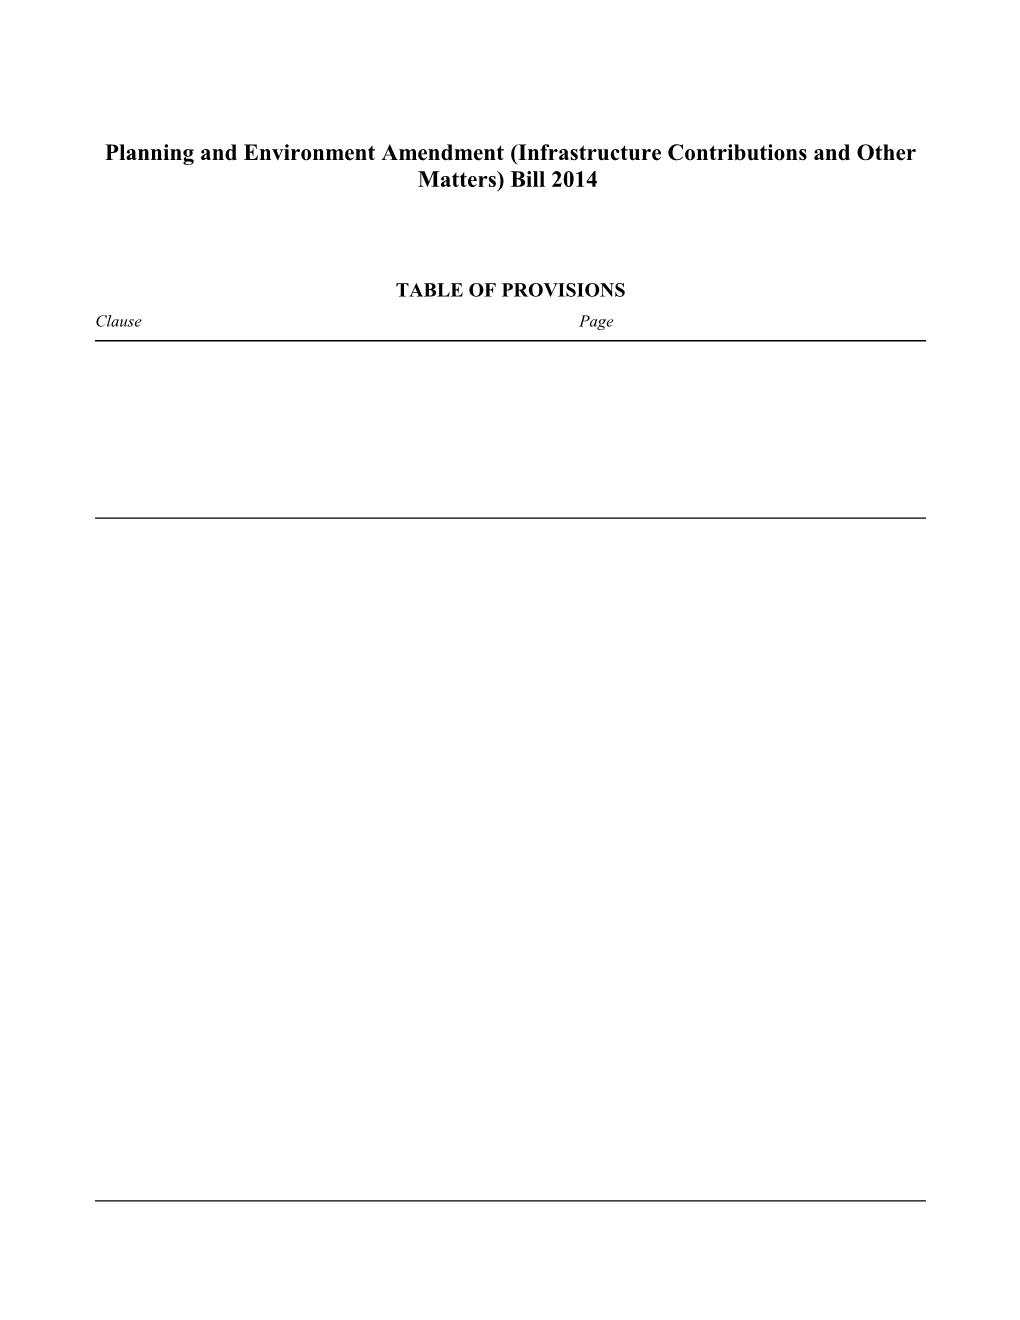 Planning and Environment Amendment (Infrastructure Contributions and Other Matters) Bill 2014